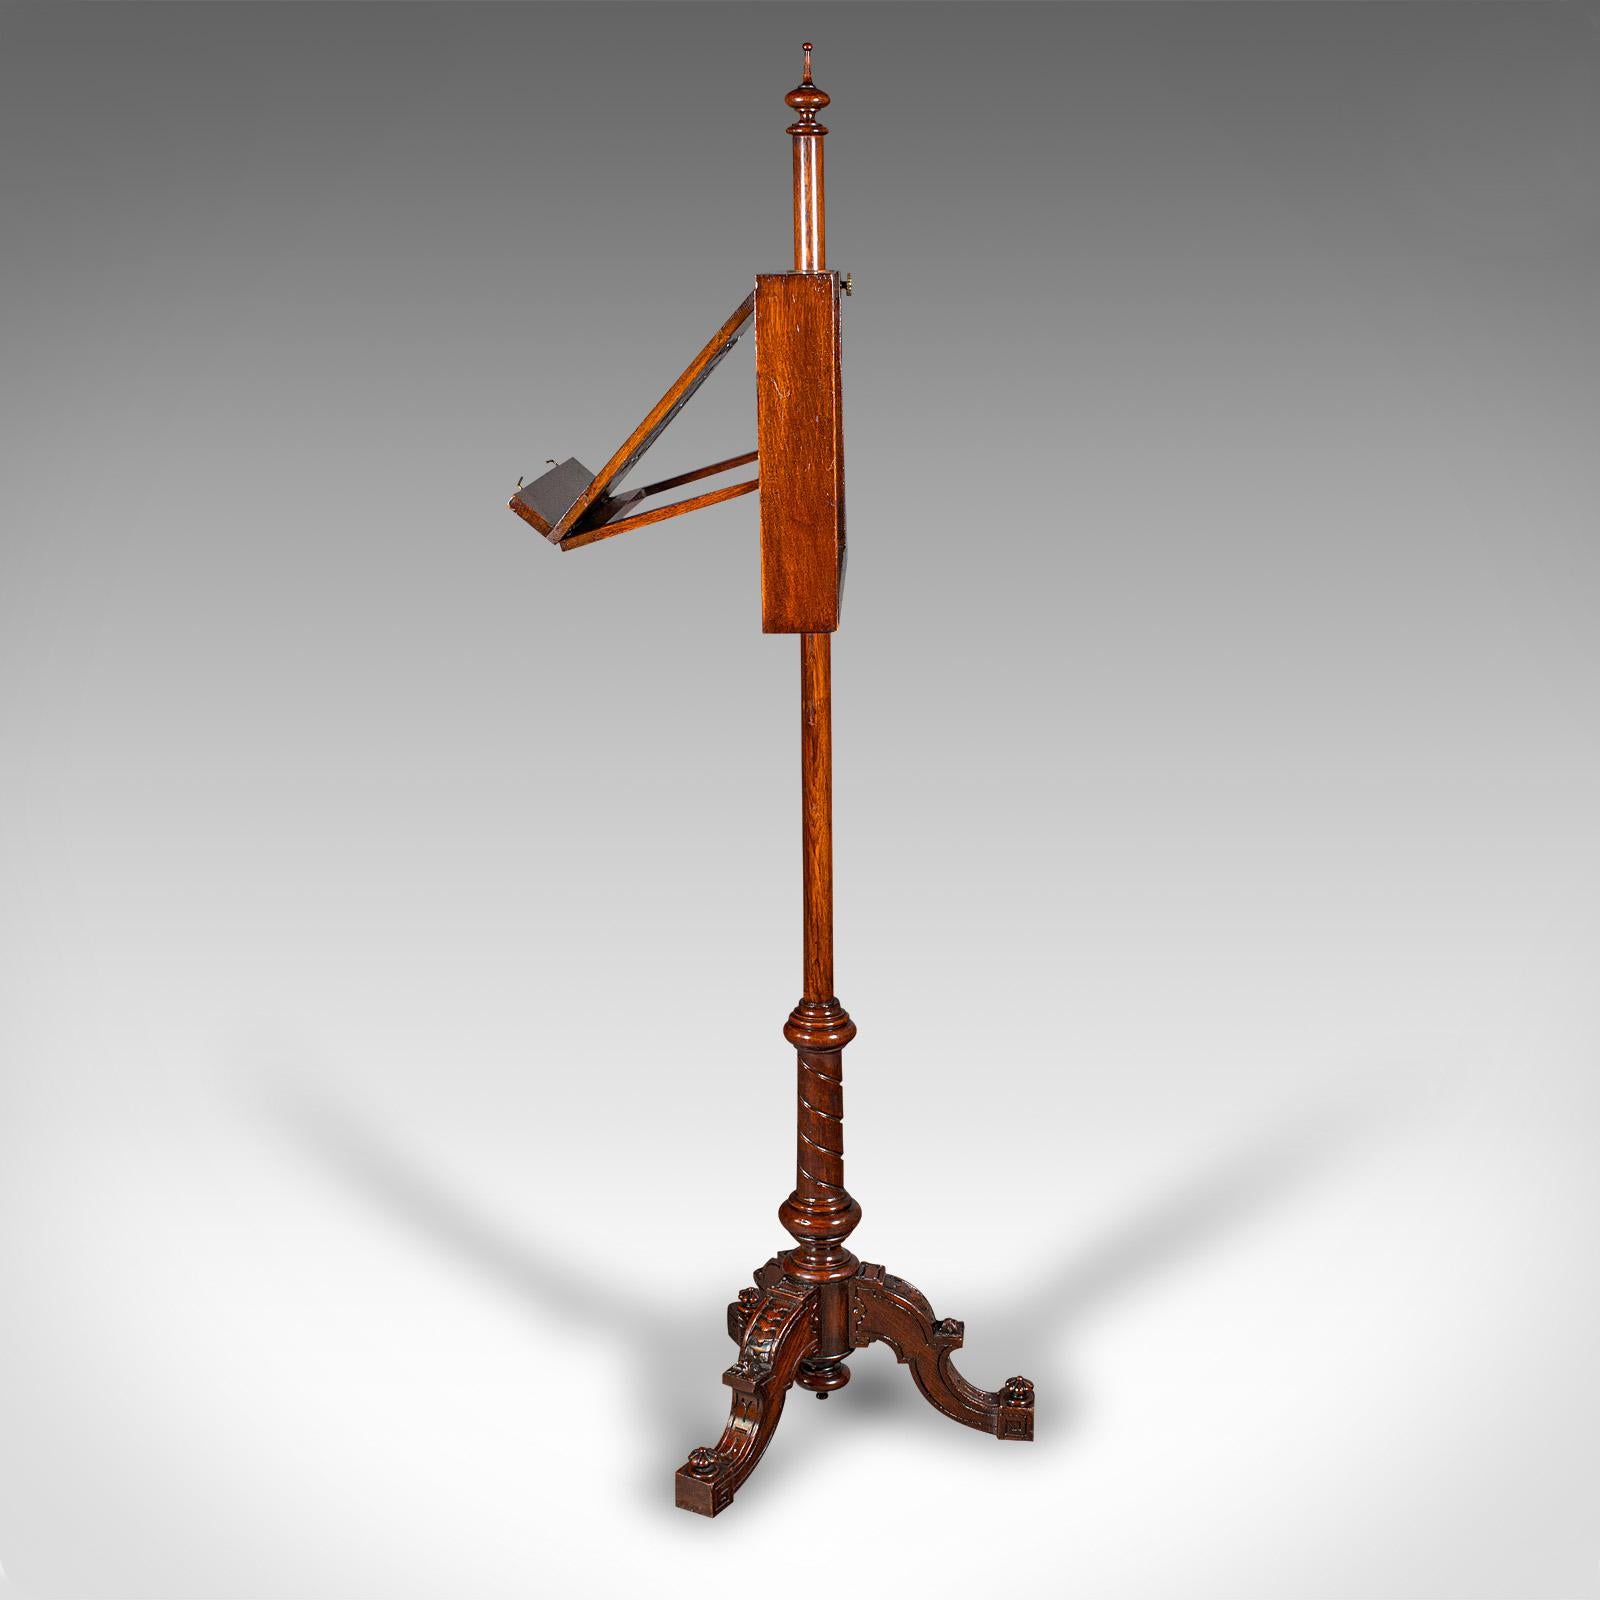 Tall Antique Music Stand, English, Oak, Adjustable Recital Rest, Victorian, 1880 For Sale 1